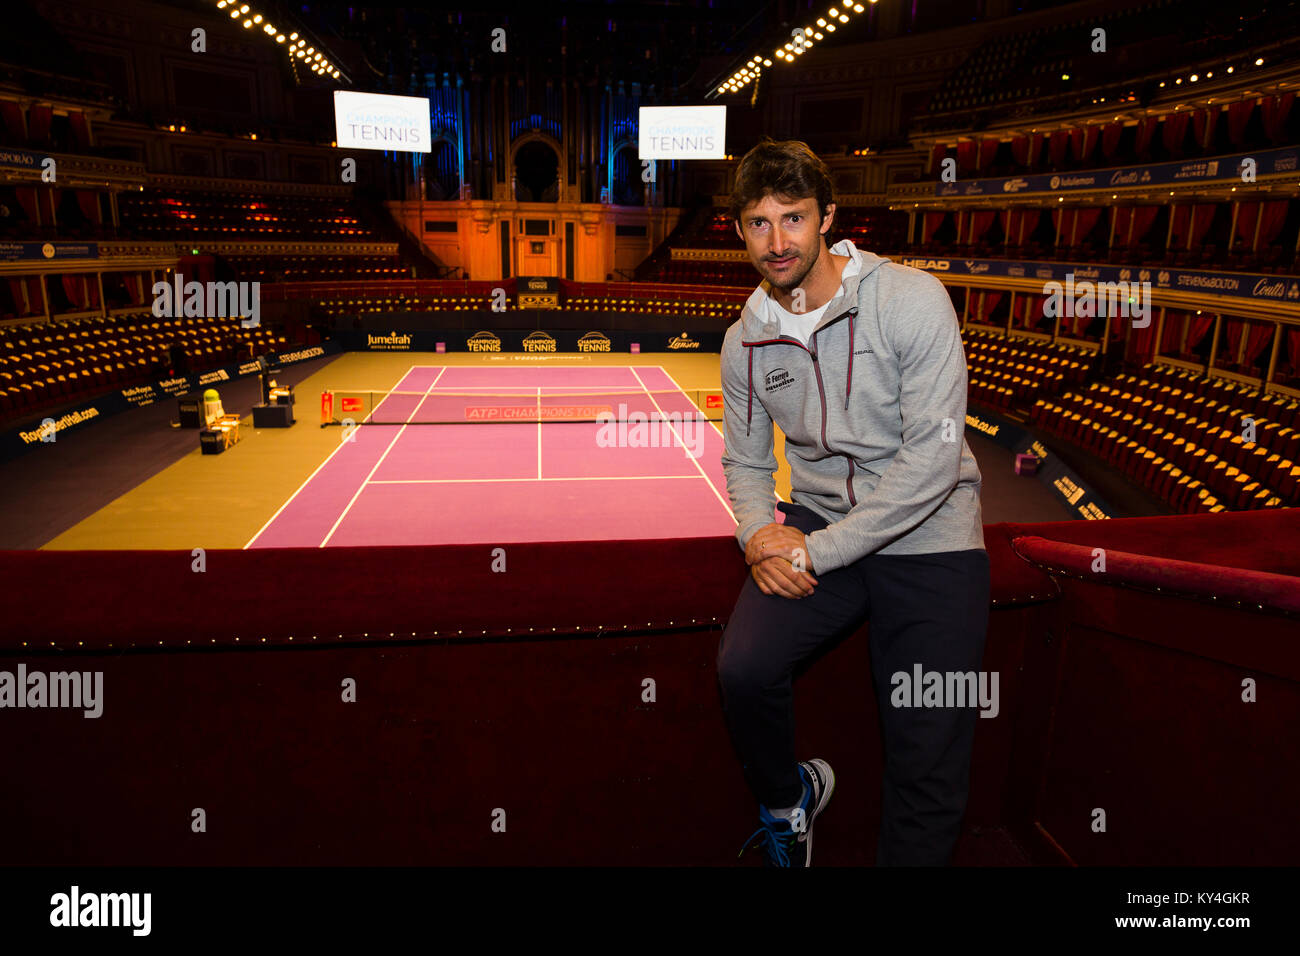 London, UK. Juan Carlos Ferrero poses during a photocall to mark the launch of the Champions' Tennis tournament at the Royal Albert Hall. Stock Photo